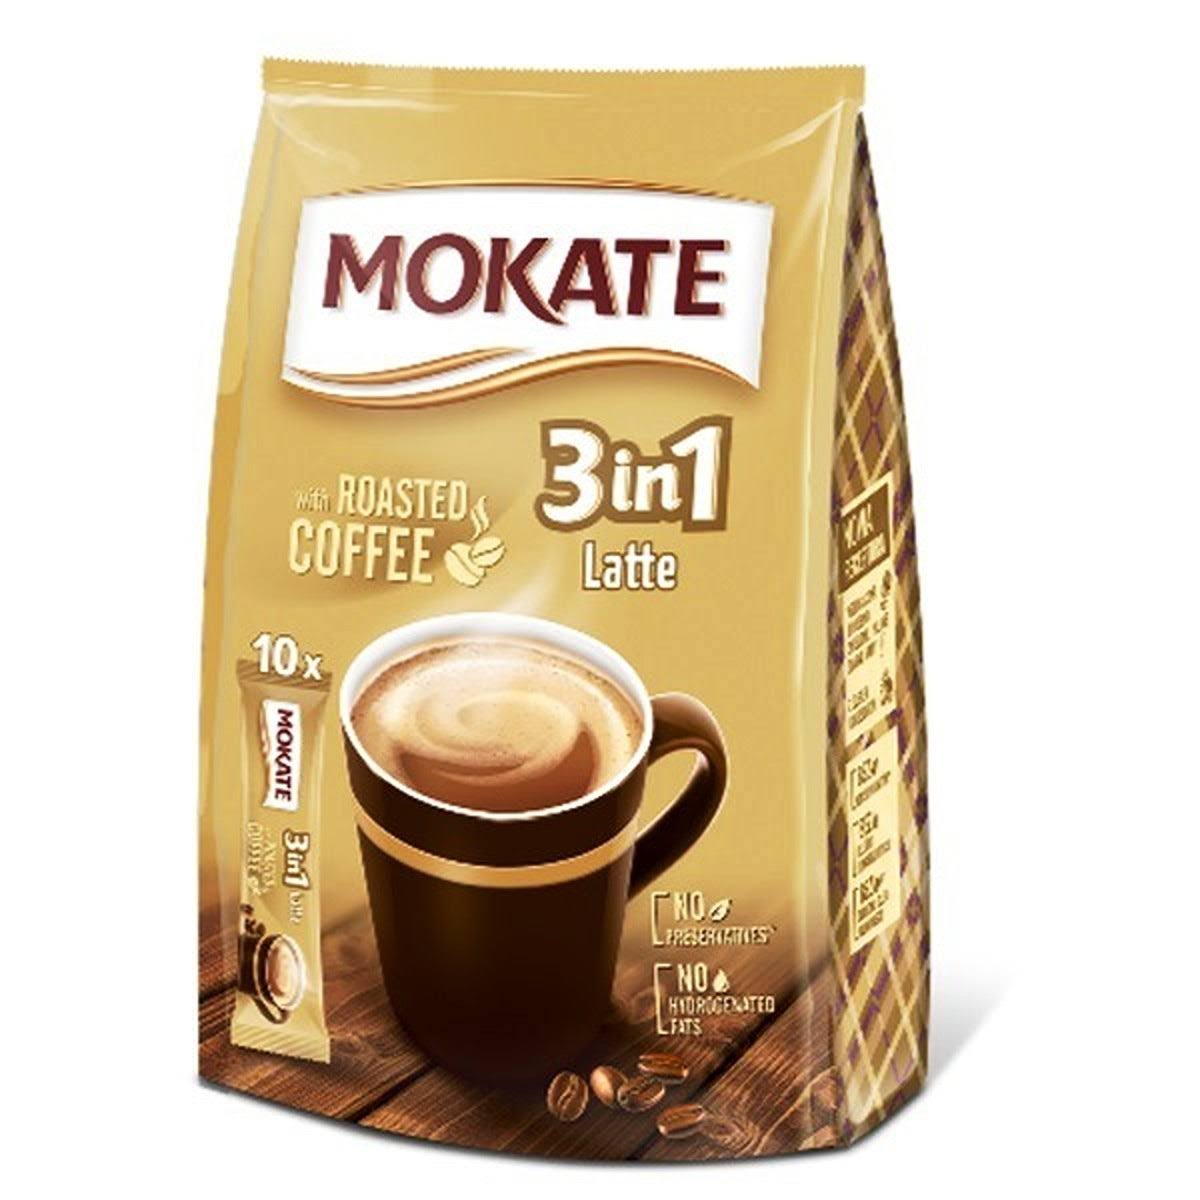 Mokate 3in1 Latte with Roasted Coffee 10 Sachets